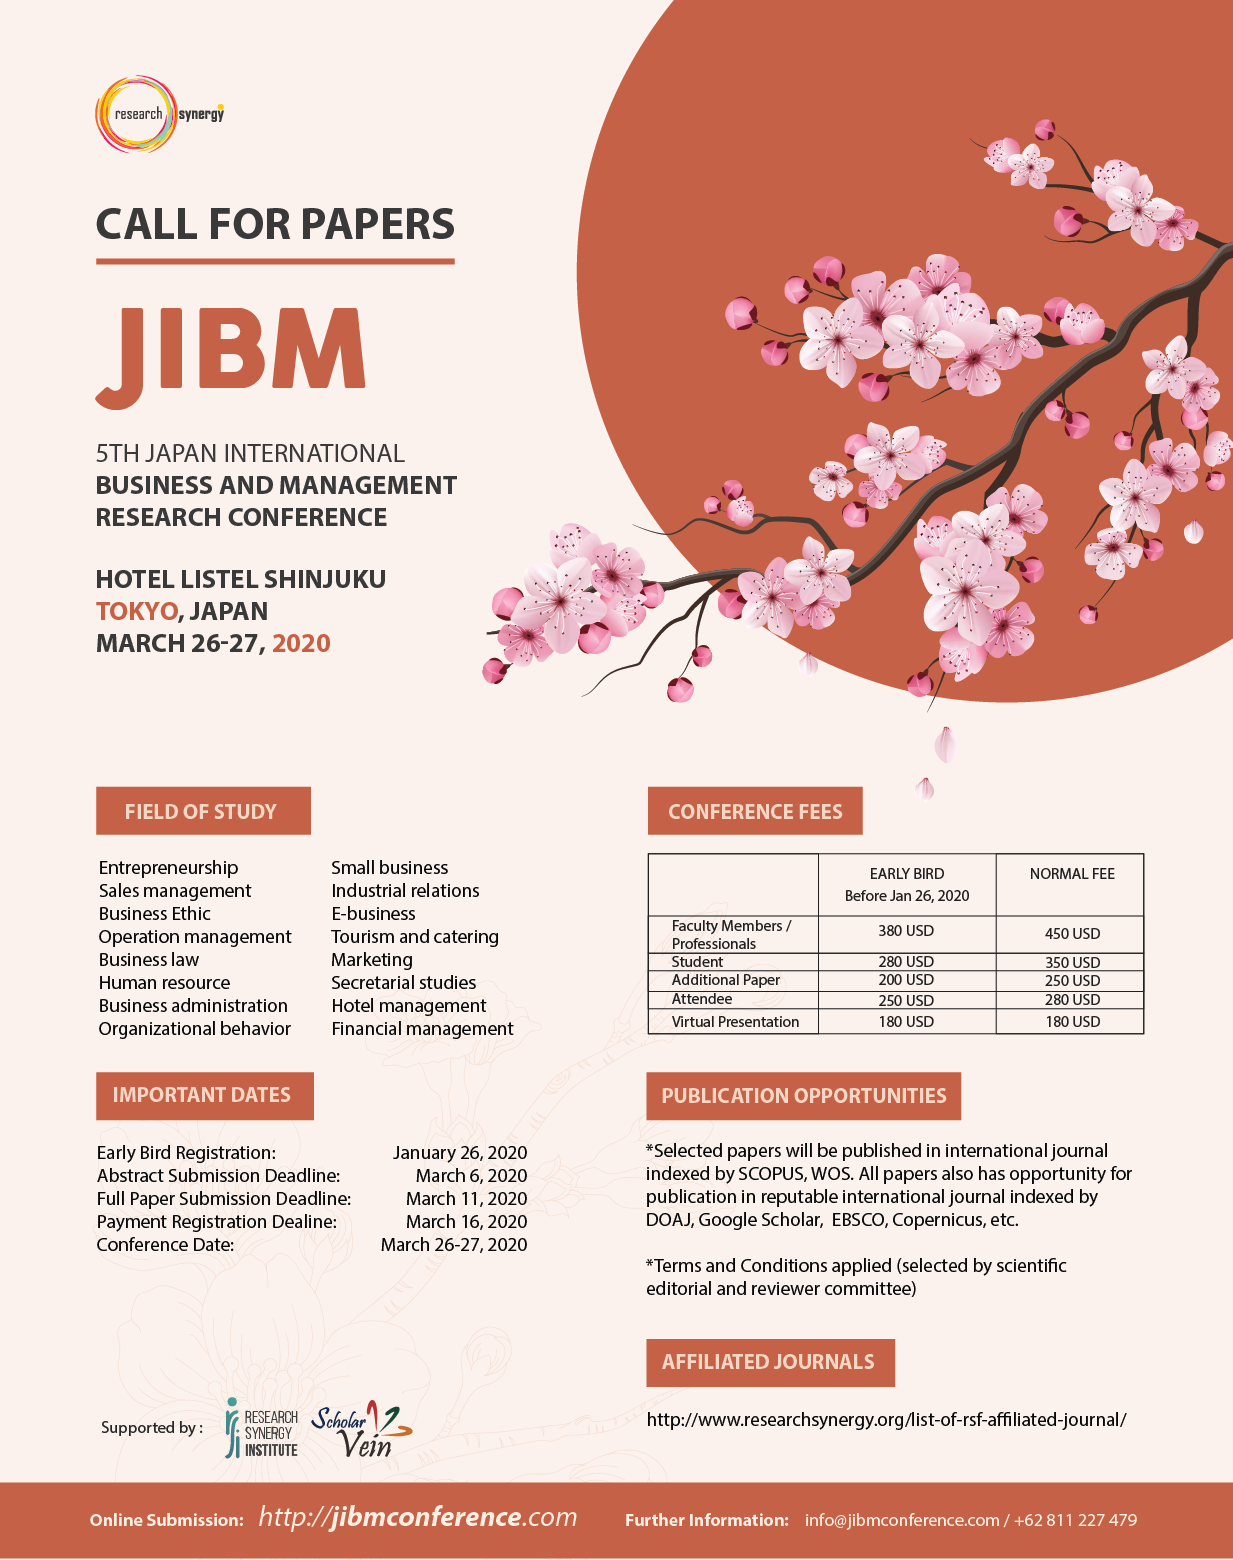 5th Japan International Business and Management Research Conference (JIBM)